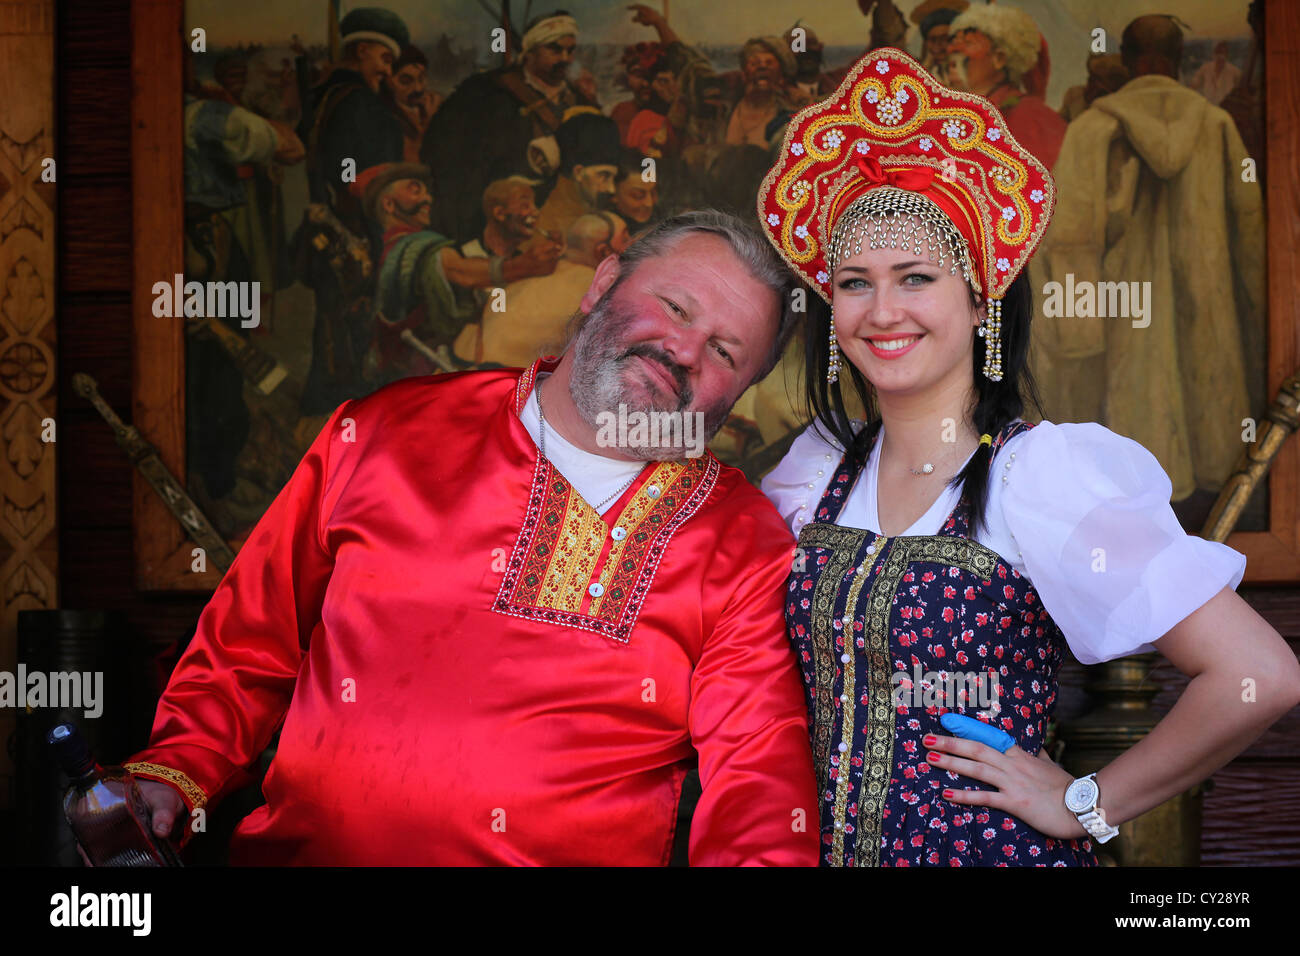 Ukrainian people in traditional clothing in front of the painting 'Reply of the Zaporozhian Cossacks' of Ilya Repin. Stock Photo